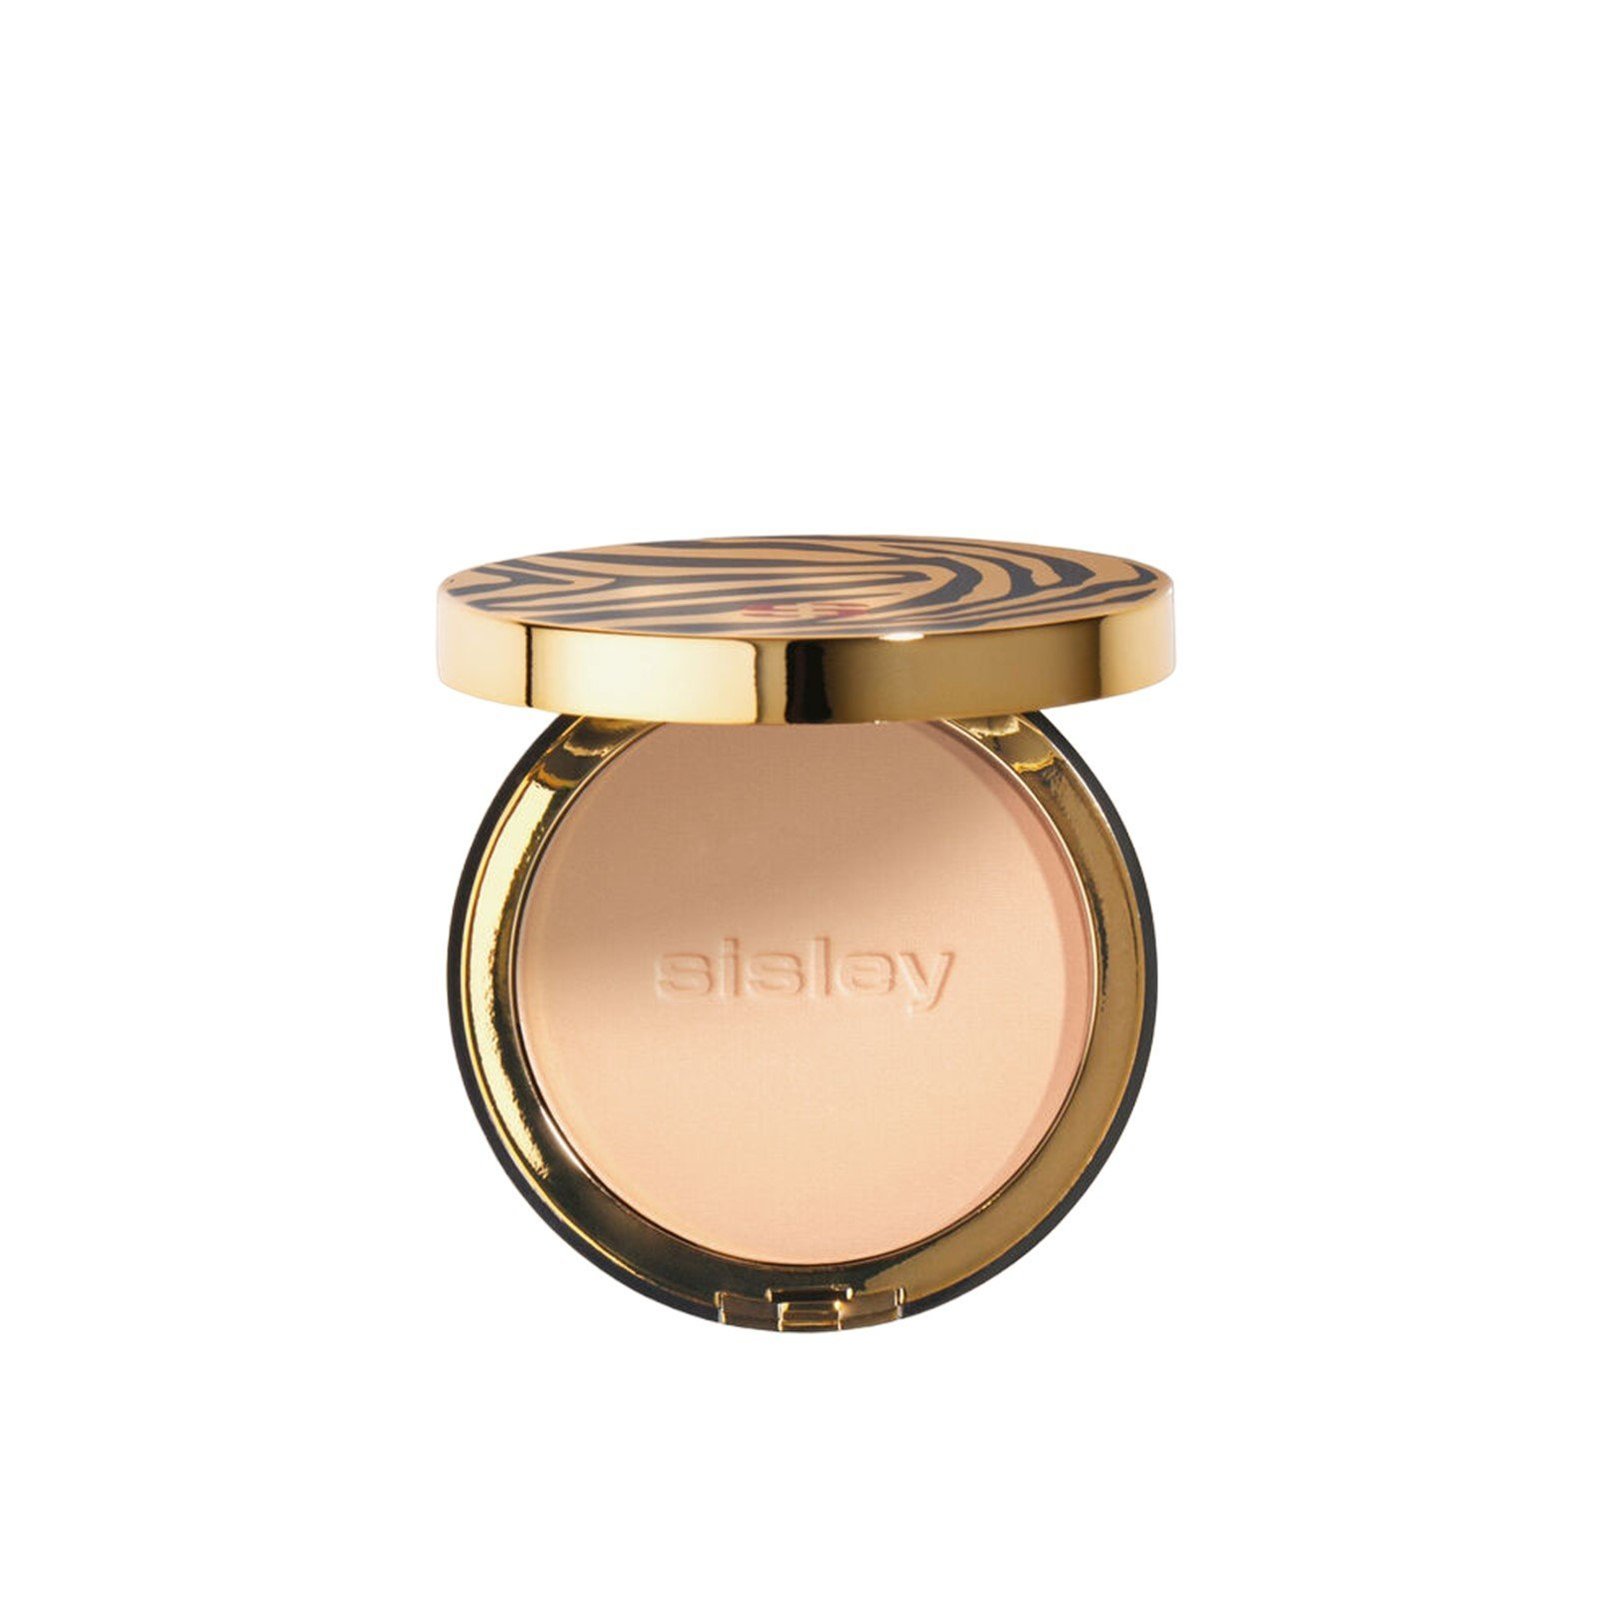 Sisley Paris Phyto-Poudre Compacte Matifying And Beautifying Pressed Powder 2 Natural 12g (0.42 oz)